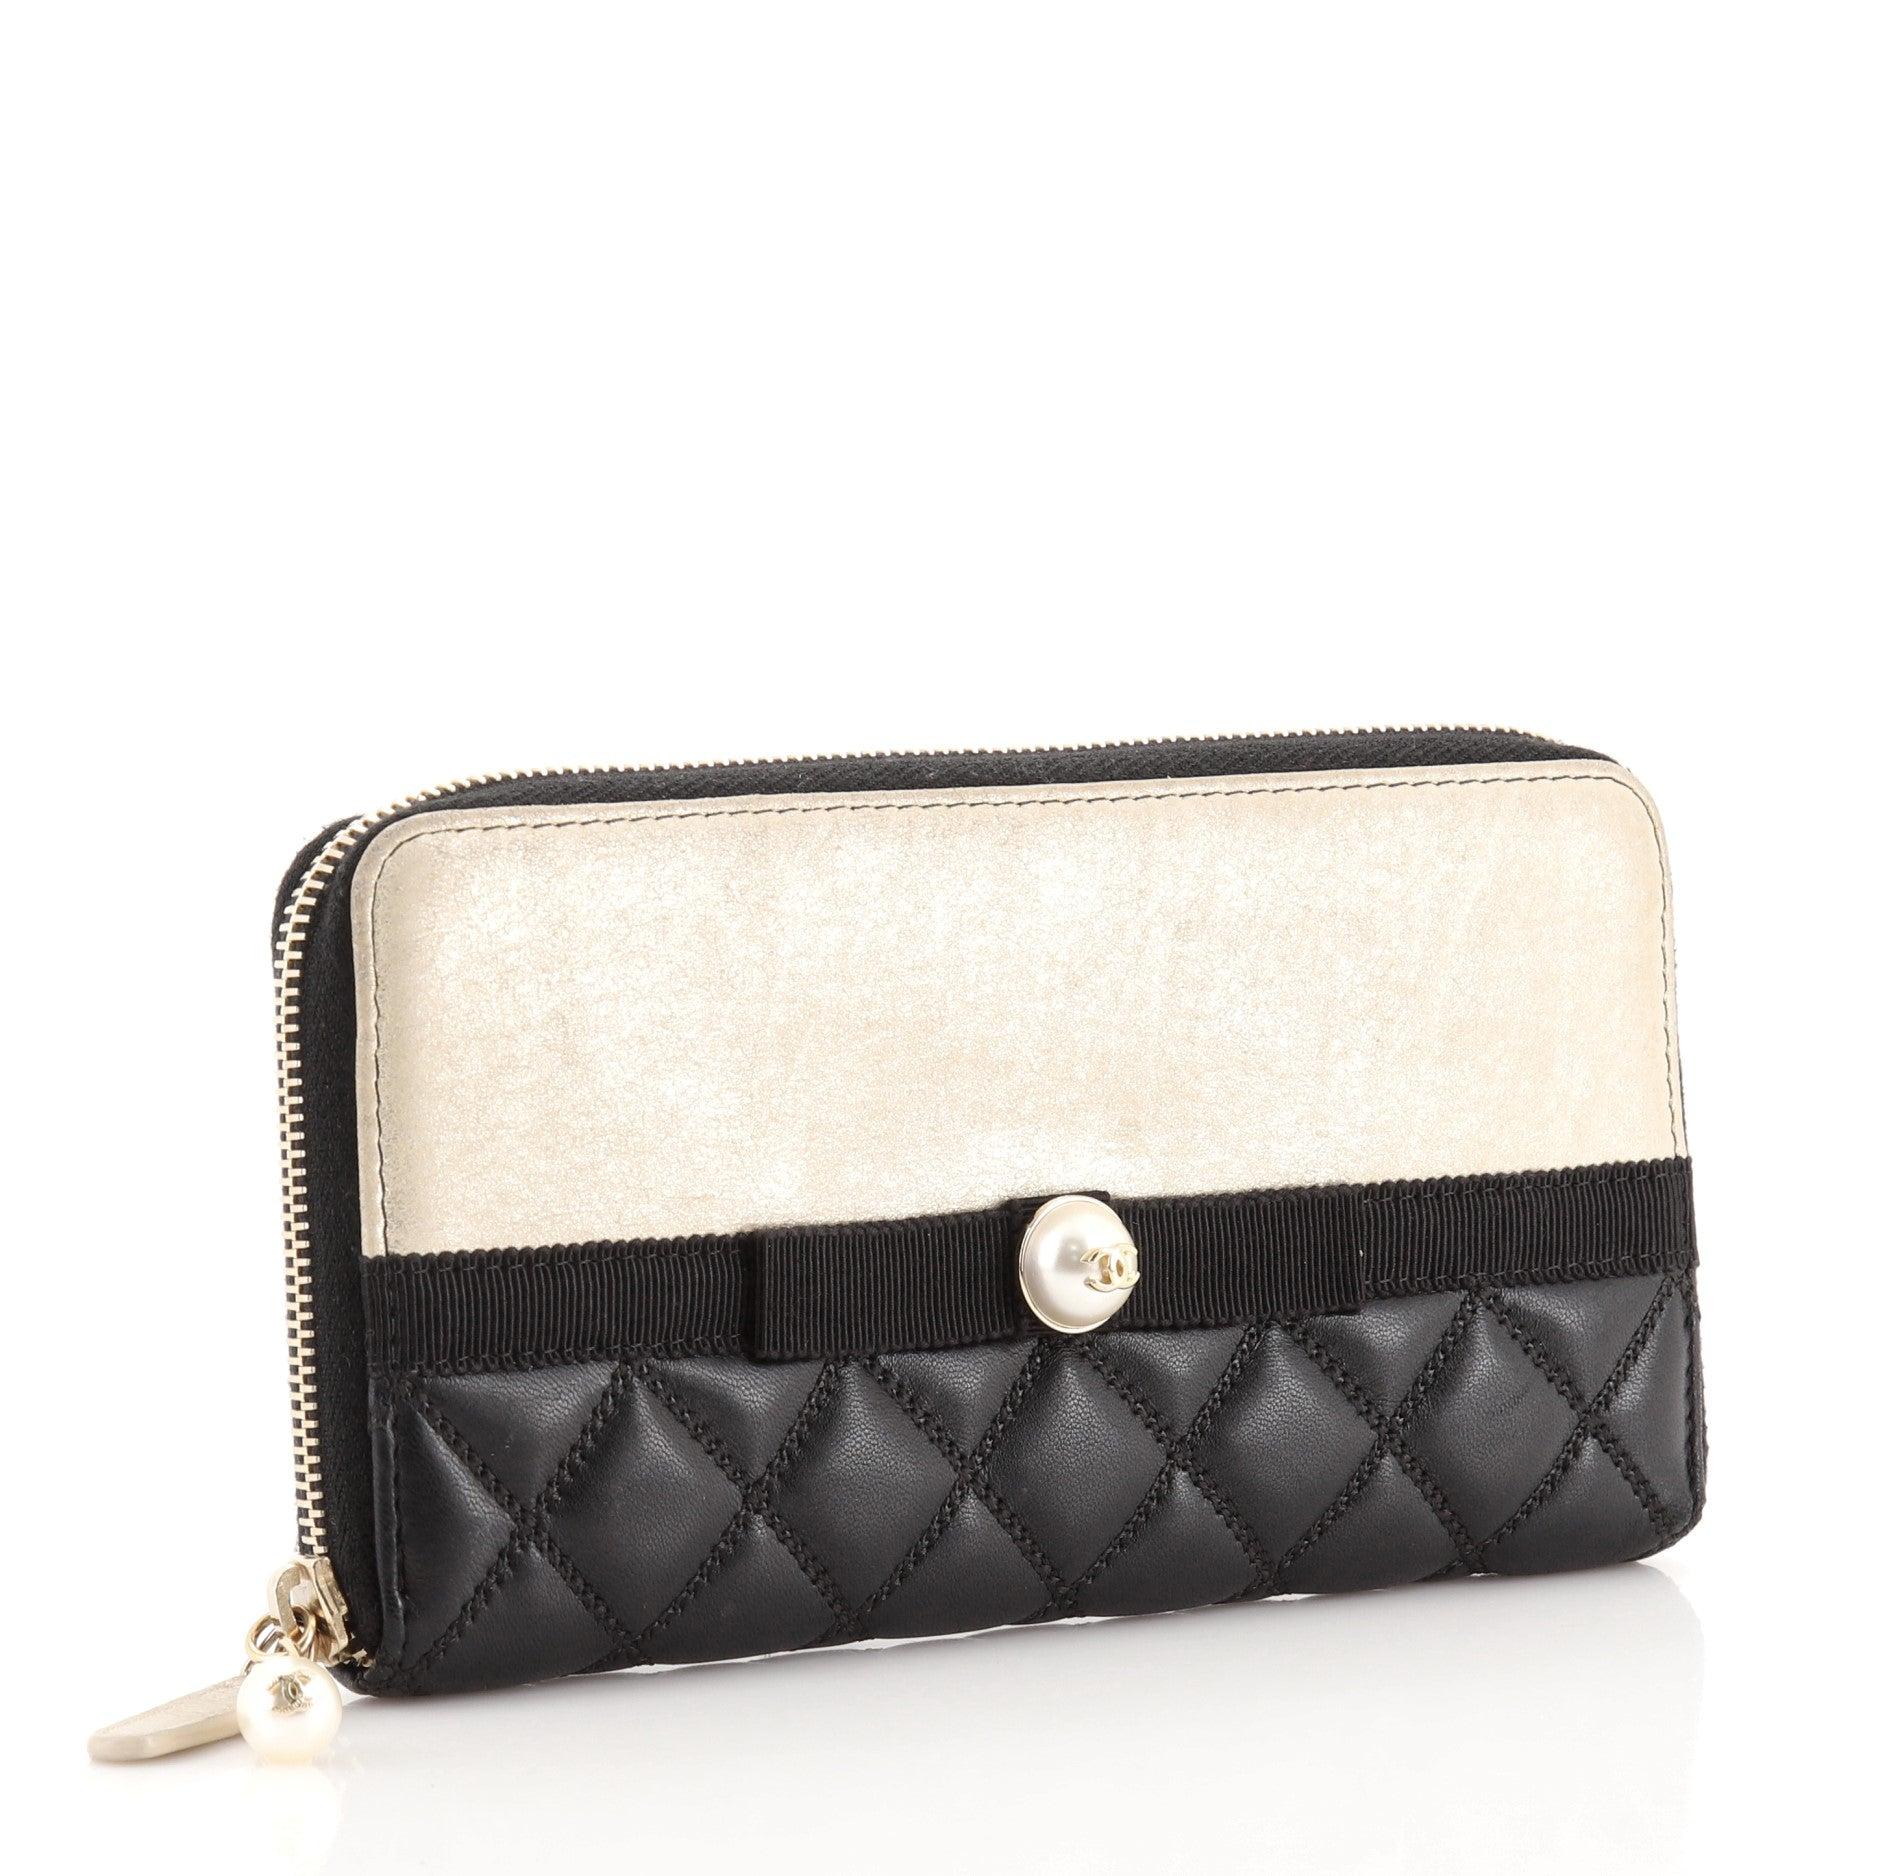 Chanel Pearl Zip Wallet Lambskin Long
Black Neutral Wallet

Condition Details: Heavy wear and discoloration on exterior edges and front, scuffs and wear on exterior and in interior, pilling on zipper tape. Cracking and peeling on zipper pull wax